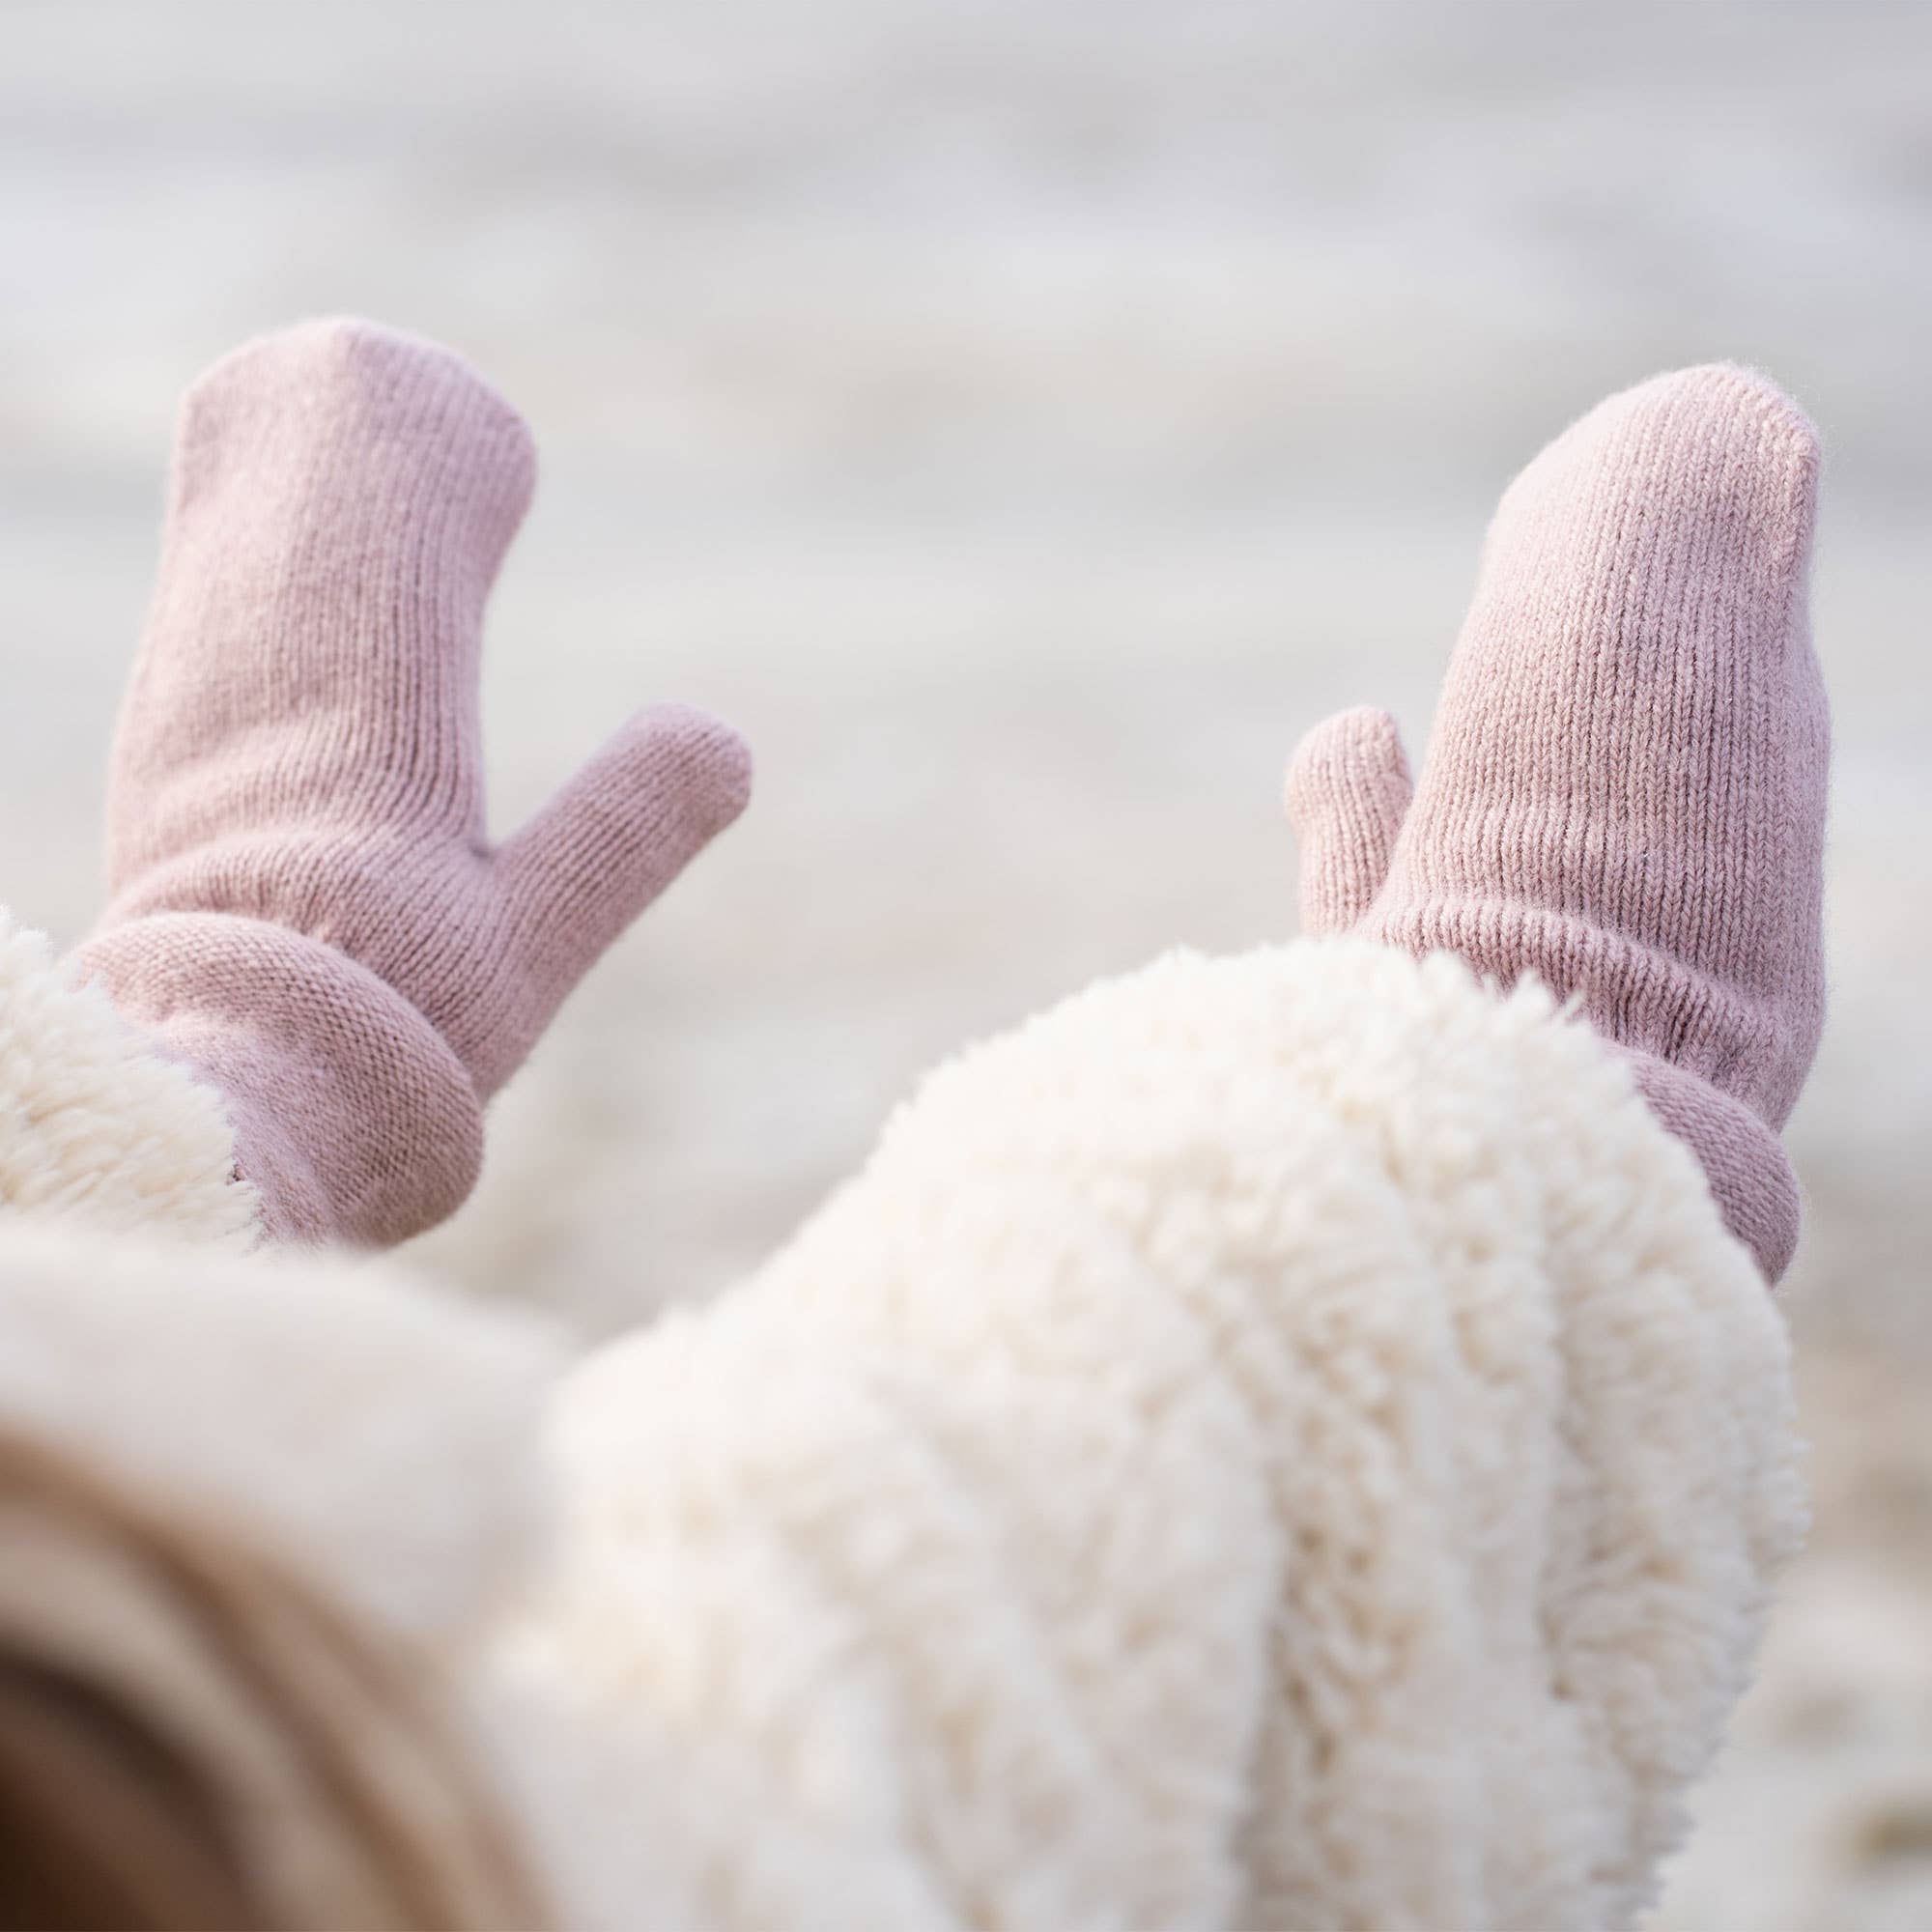 menique - Kids' Mittens Knitted Merino & Cashmere: 3-6 years / Dusty pink